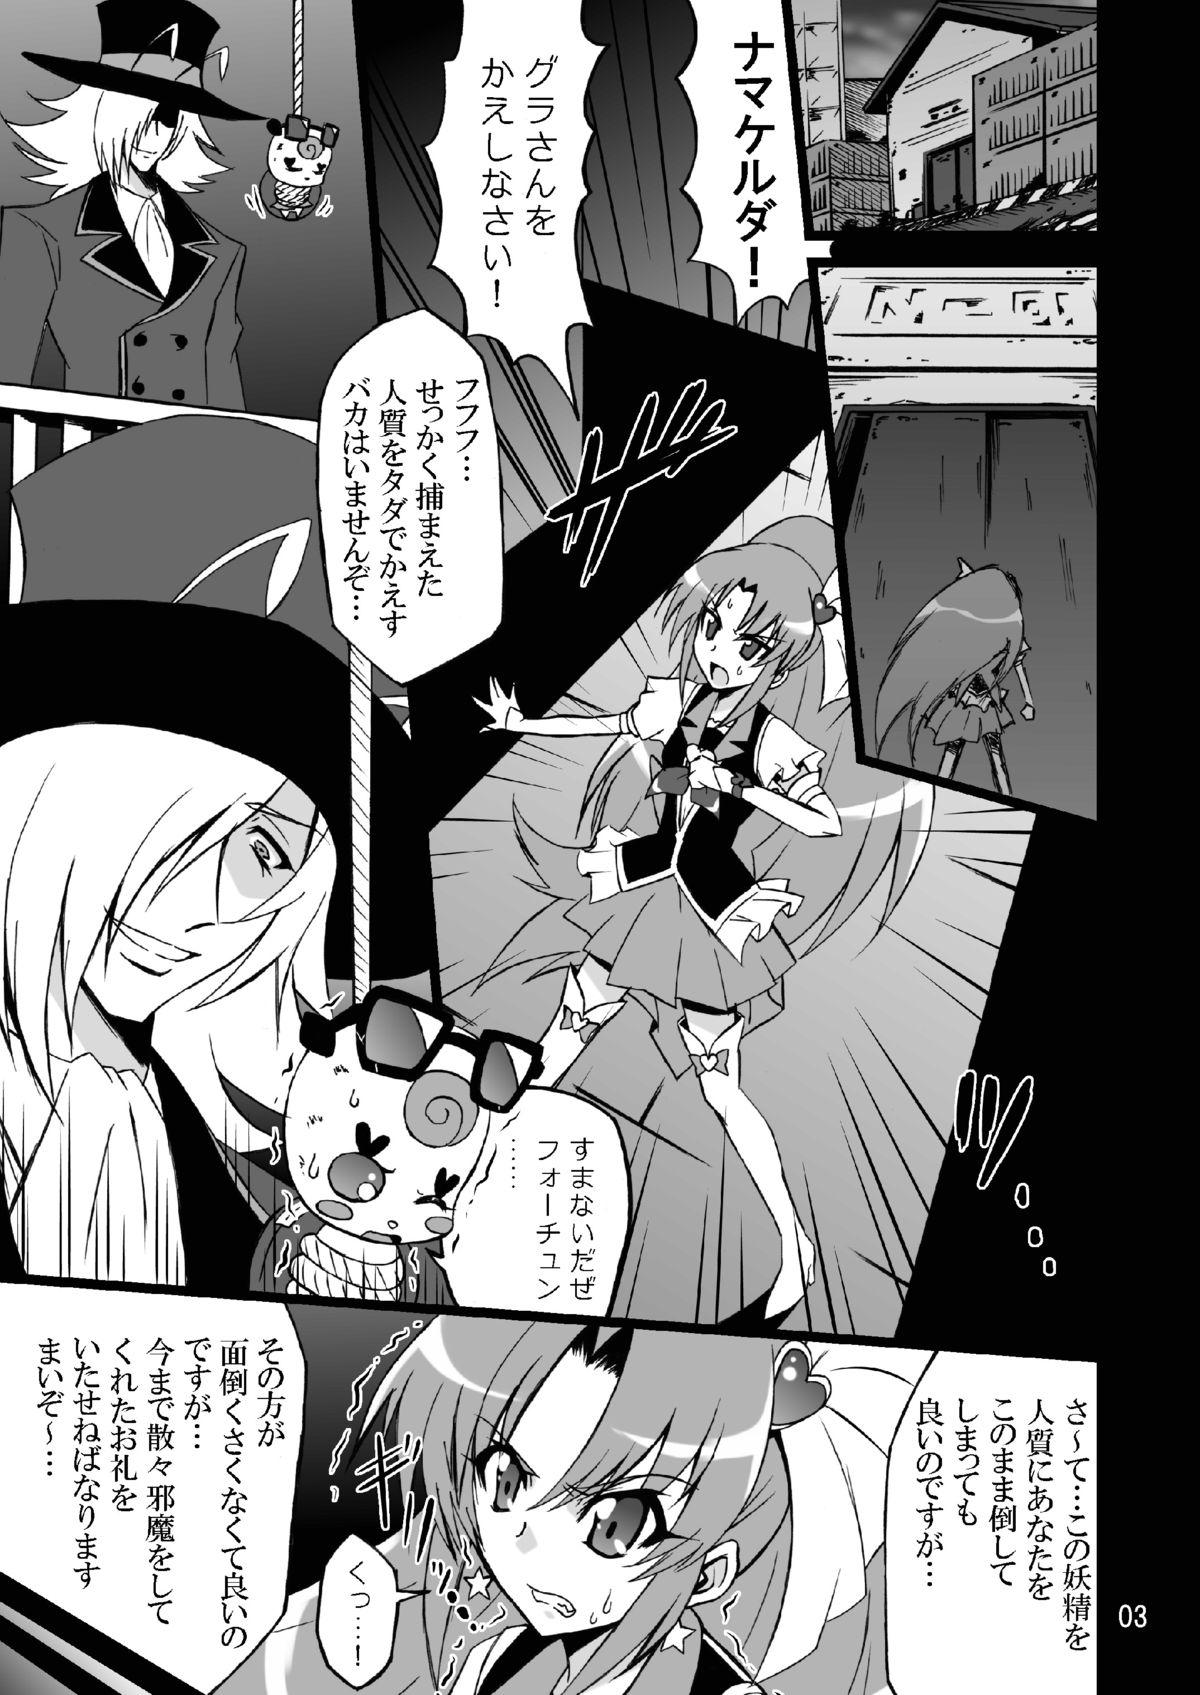 Japan WHEEL of FORTUNE - Dokidoki precure Happinesscharge precure Selfie - Page 3